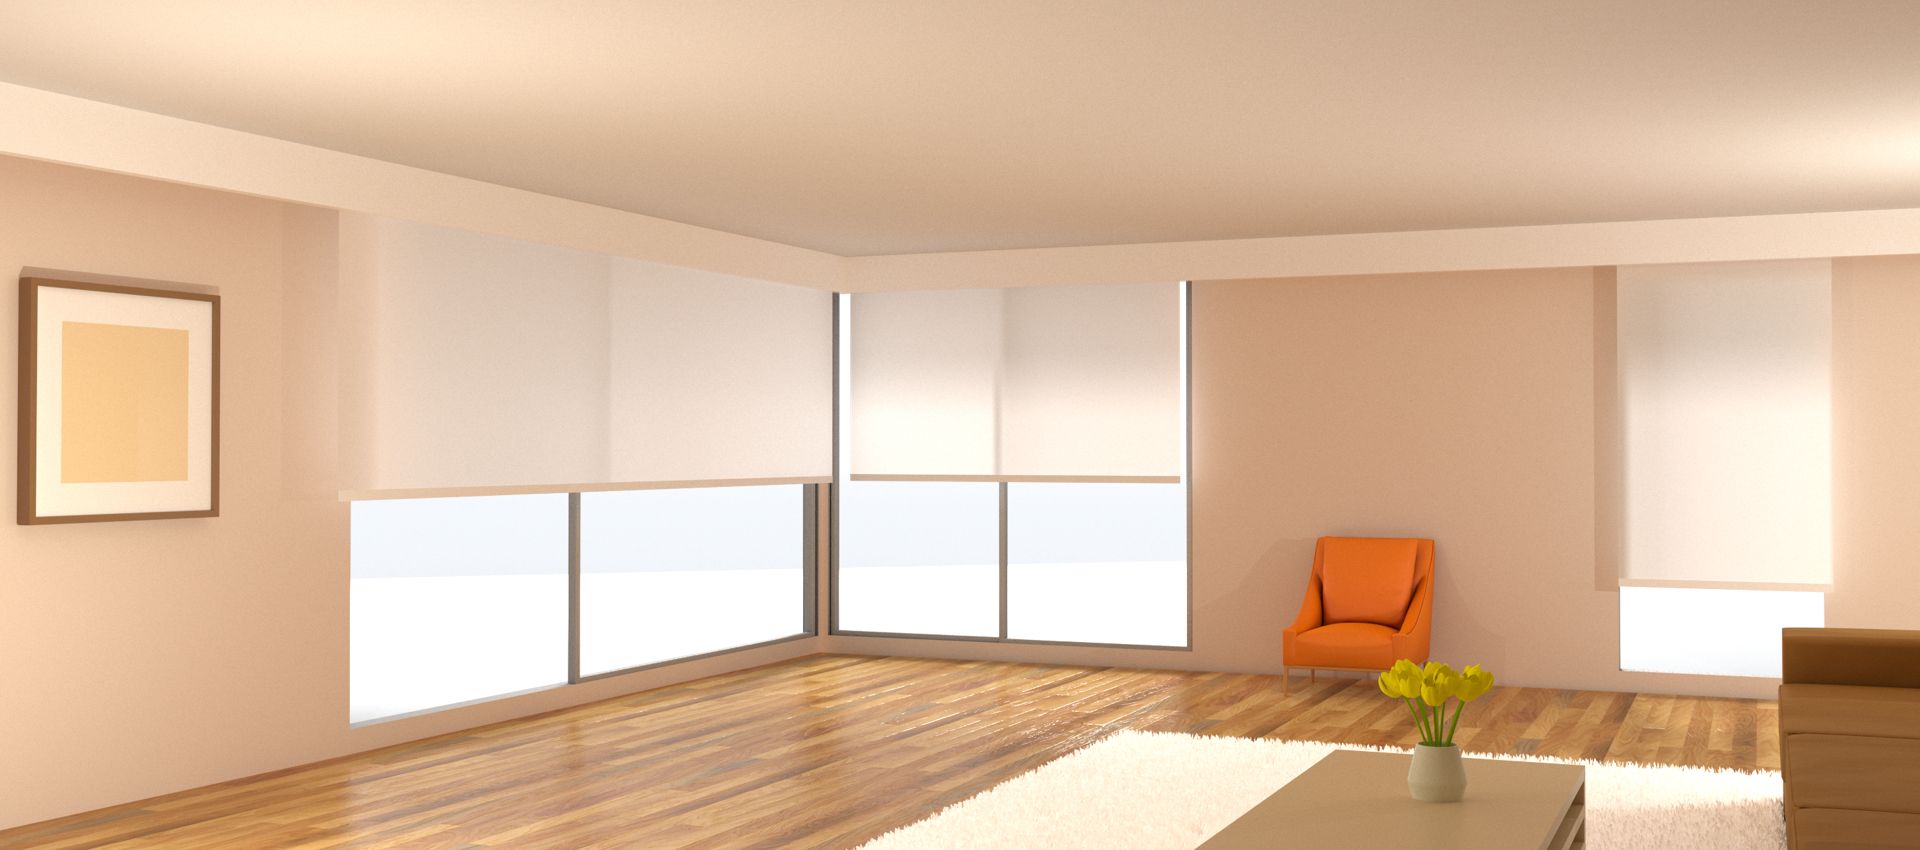 Electric Blinds And Curtains Hong Kong, Blinds For Life Awnings Laminate Flooring